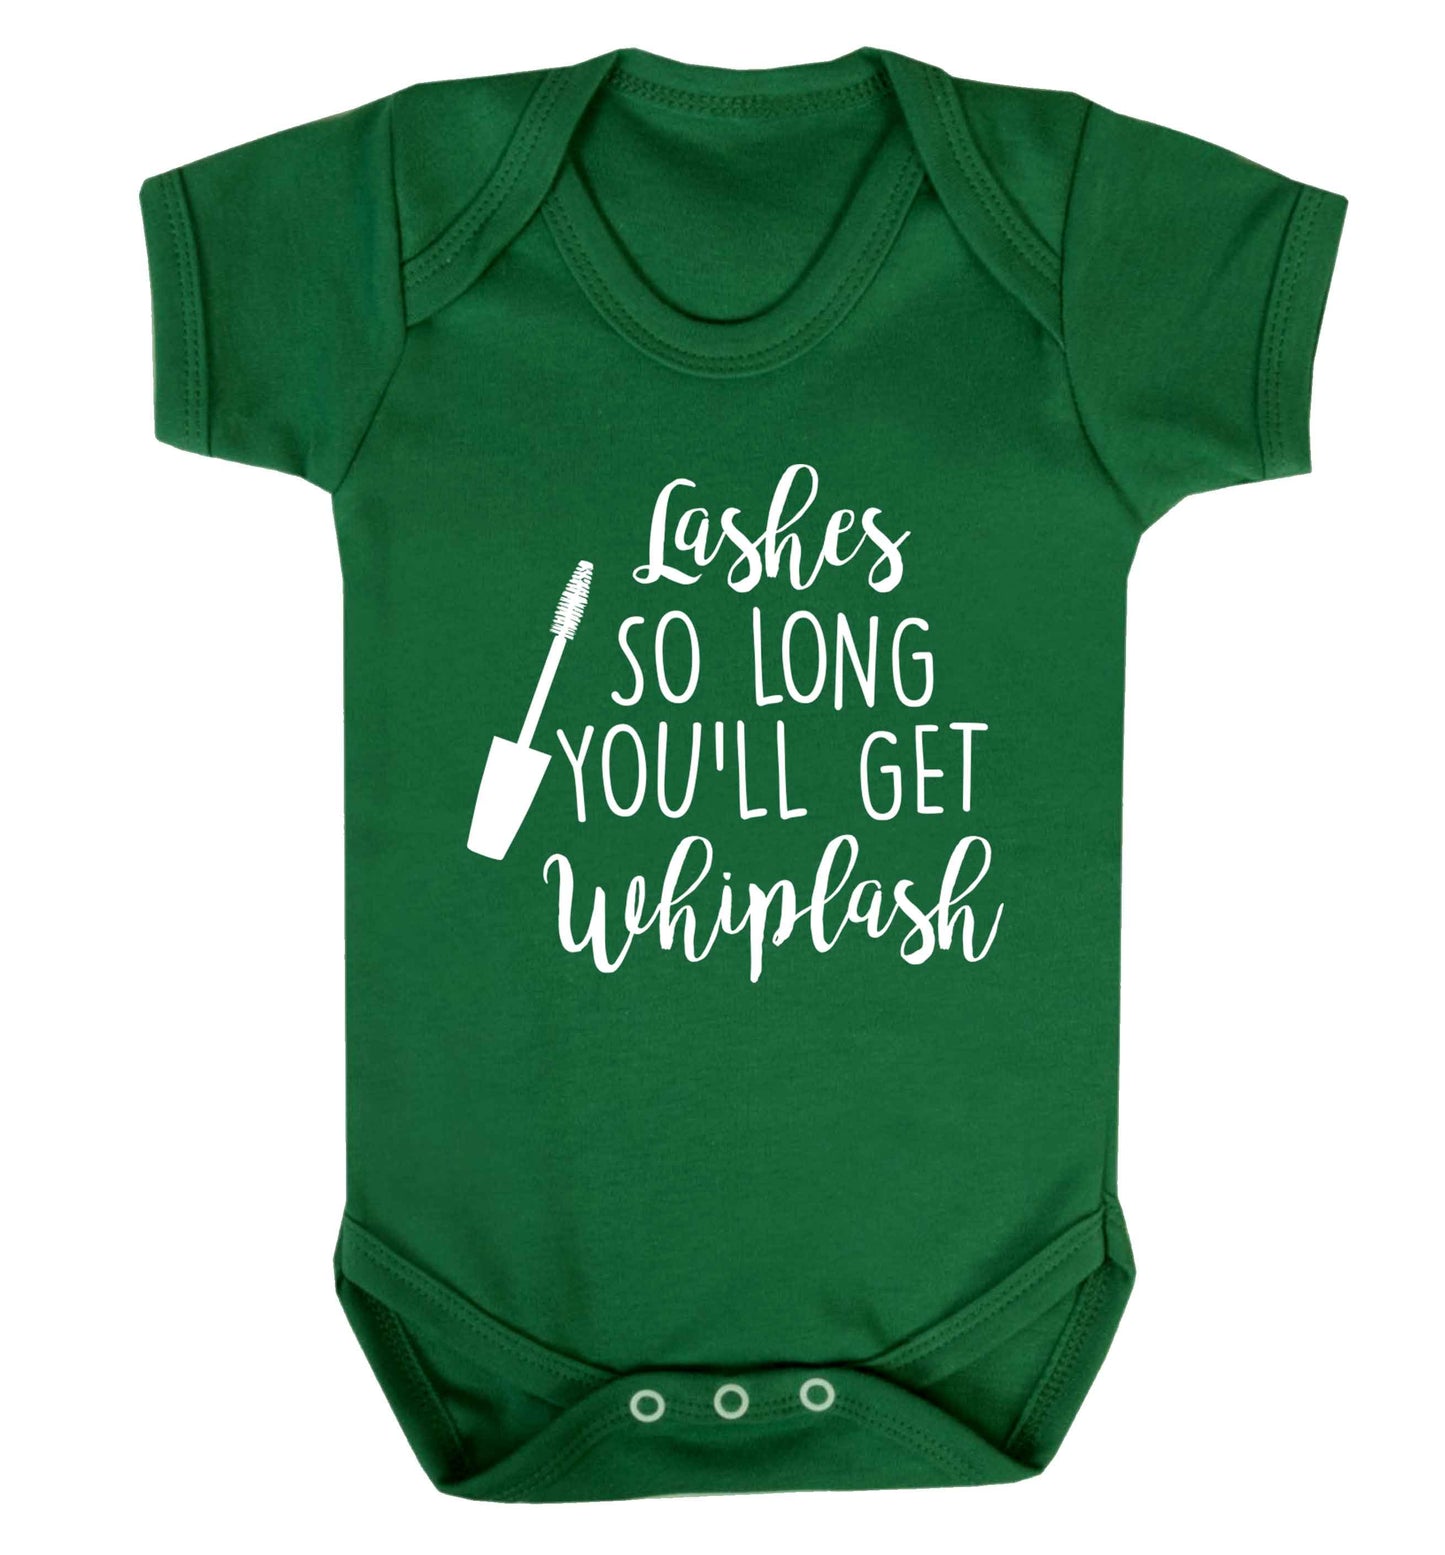 Lashes so long you'll get whiplash Baby Vest green 18-24 months